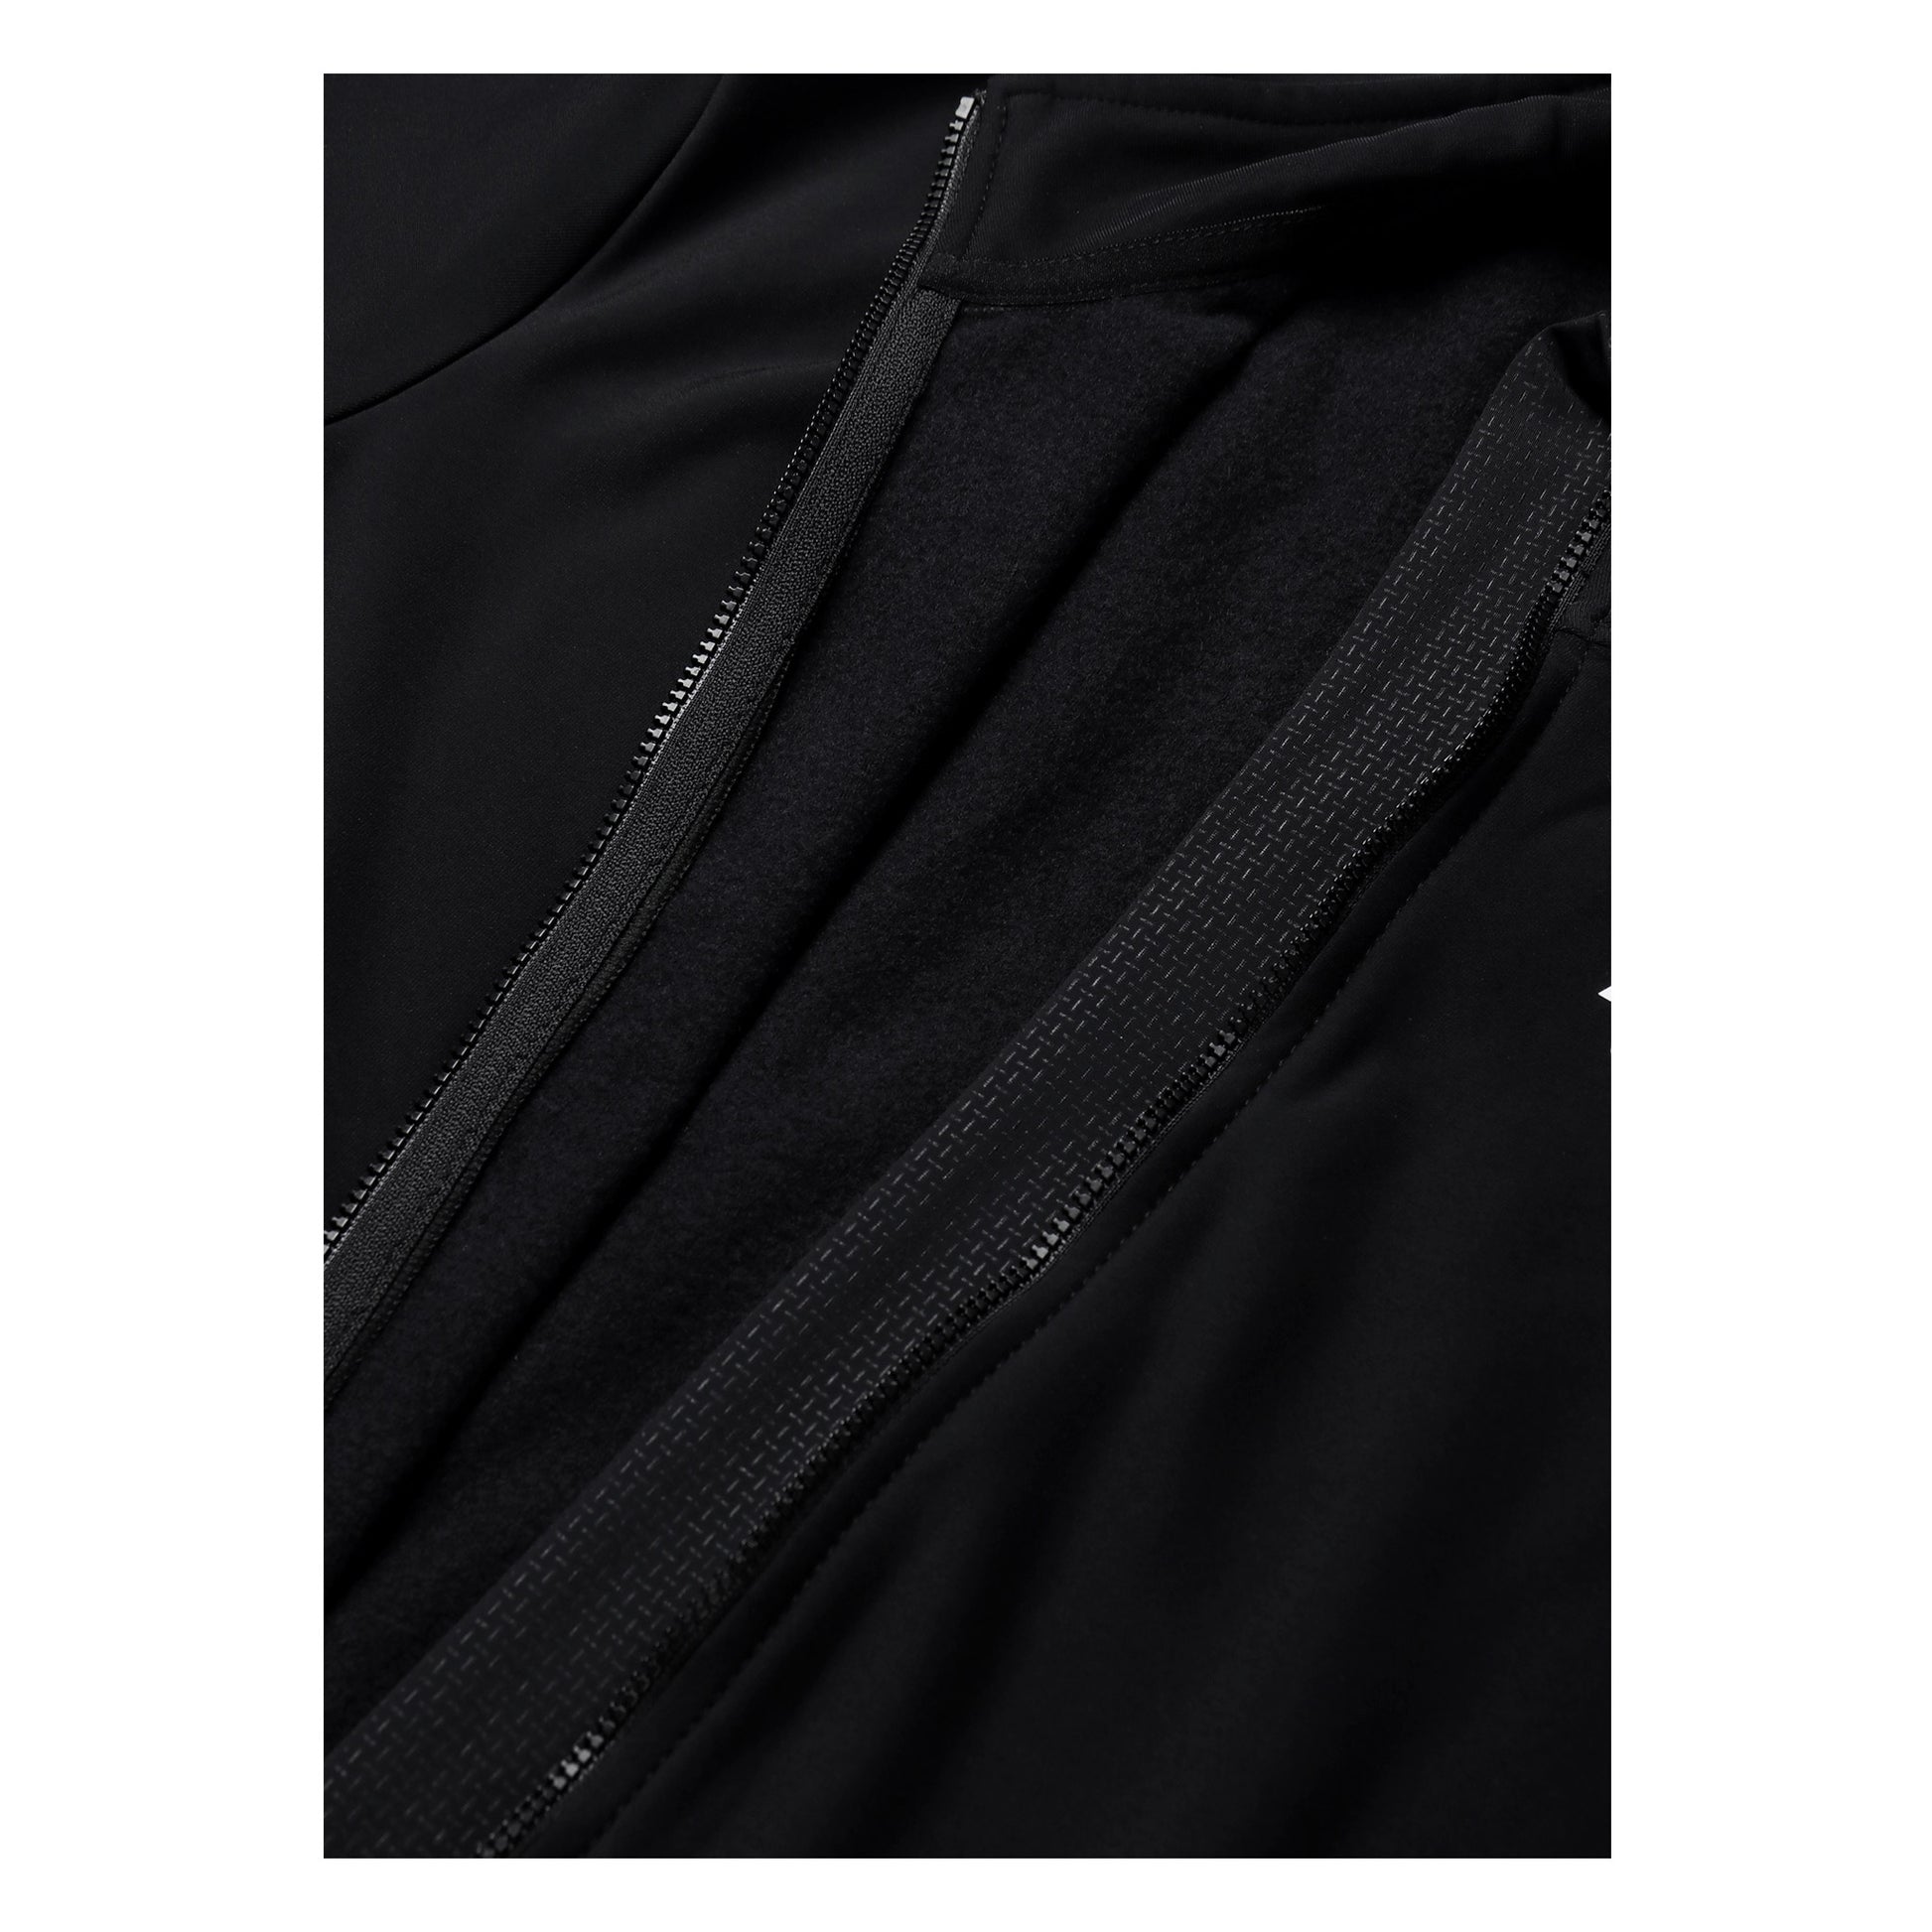 Milano Thermal Long Sleeve Jersey Black from Ascender Cycling Club Zürich Switzerland Protective Cover Zipper View